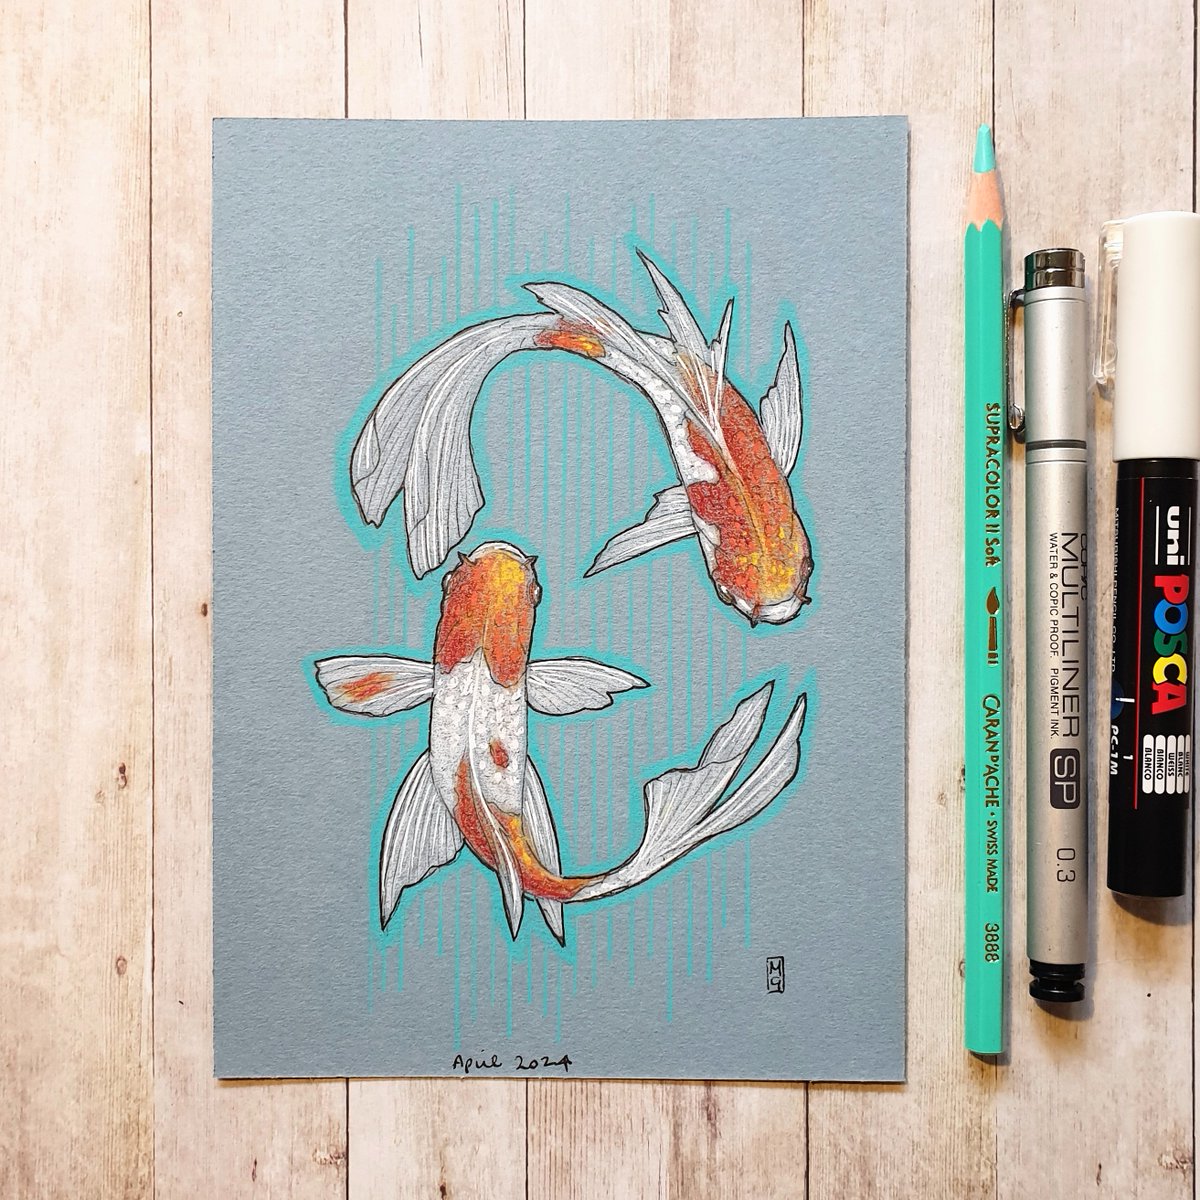 Koi fish are a colourful, ornamental versions of the common carp. My drawing is available here... theweeowlart.etsy.com/listing/169451… #OriginalArt #drawing #PenAndInk #ColourPencil #artwork #art #TraditionalArt #Fish #Koi